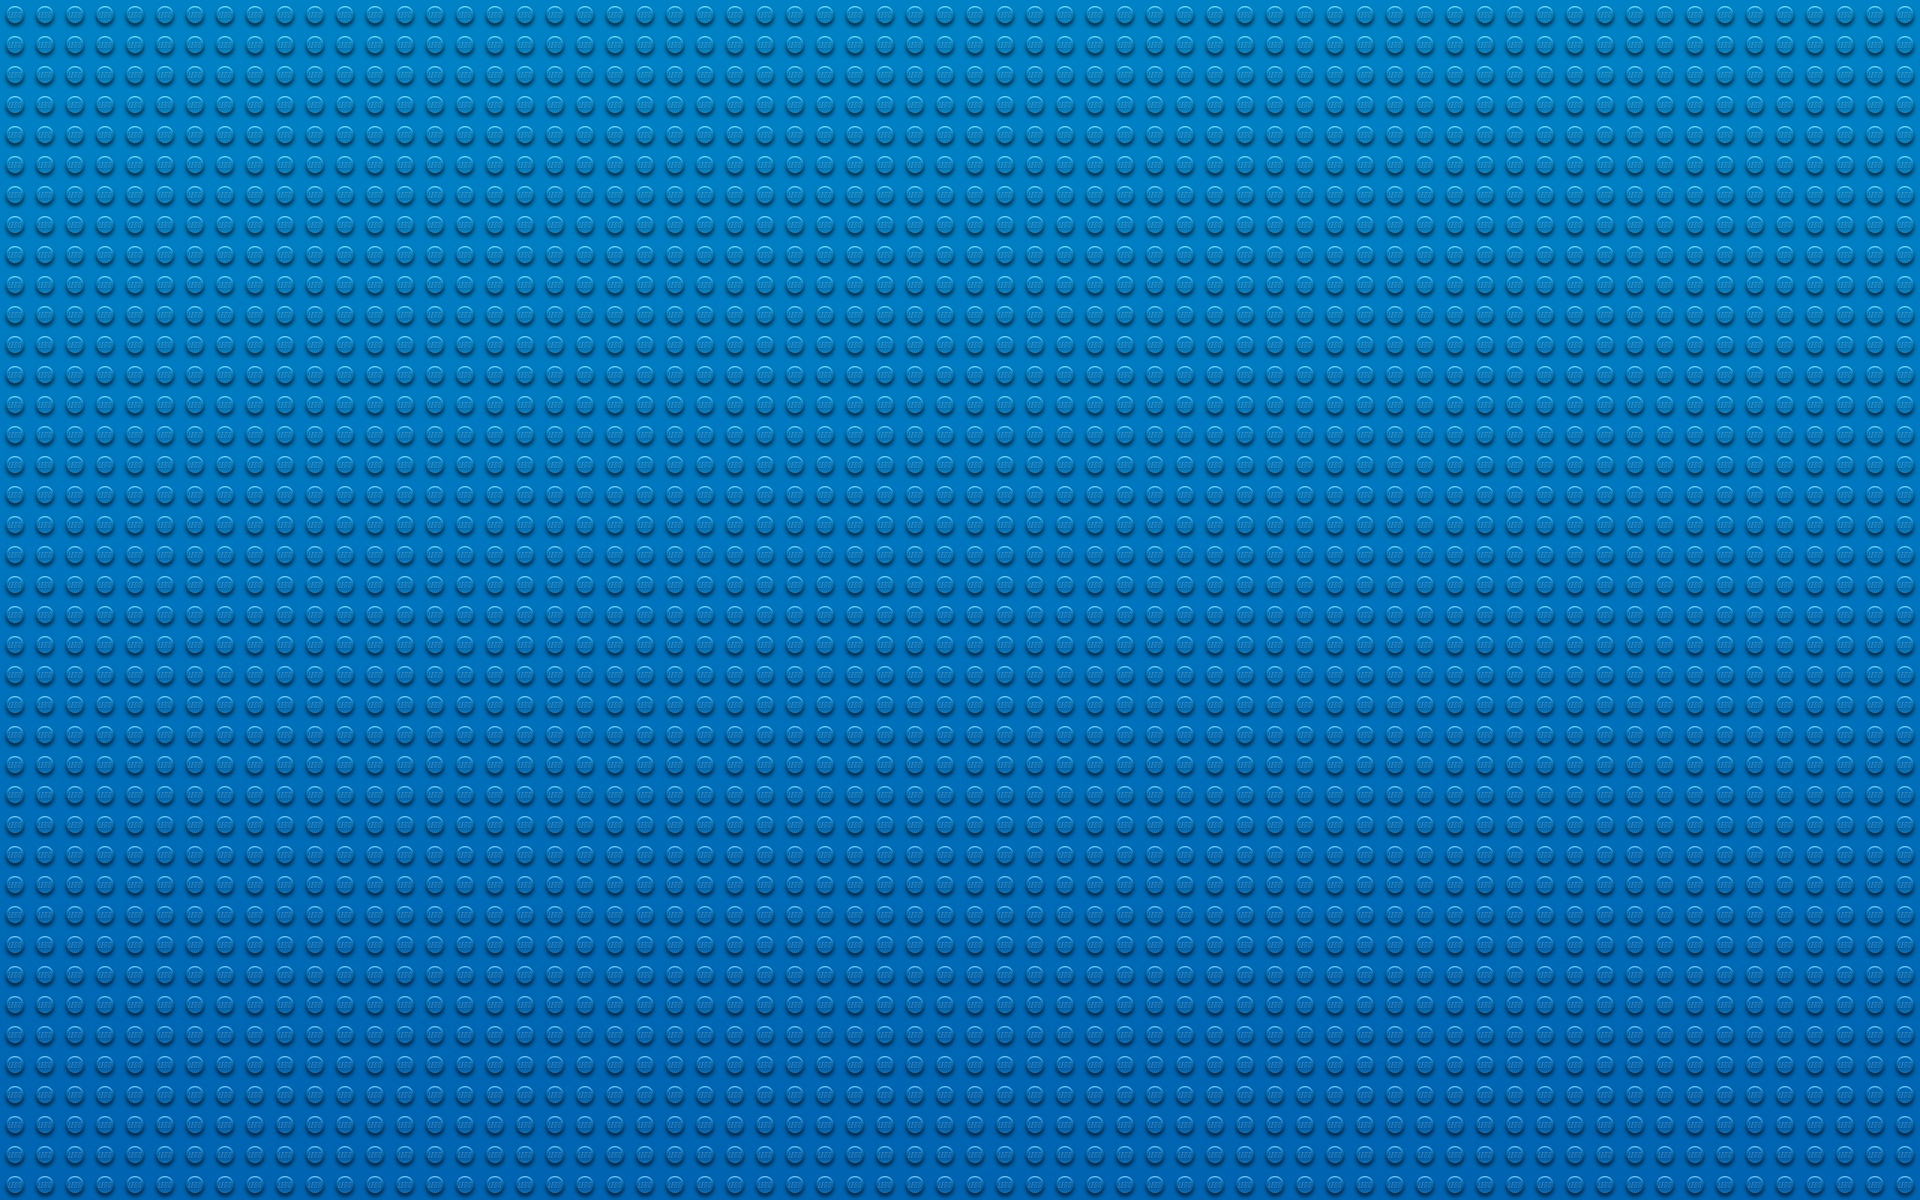 Lego Texture for 1920 x 1200 widescreen resolution